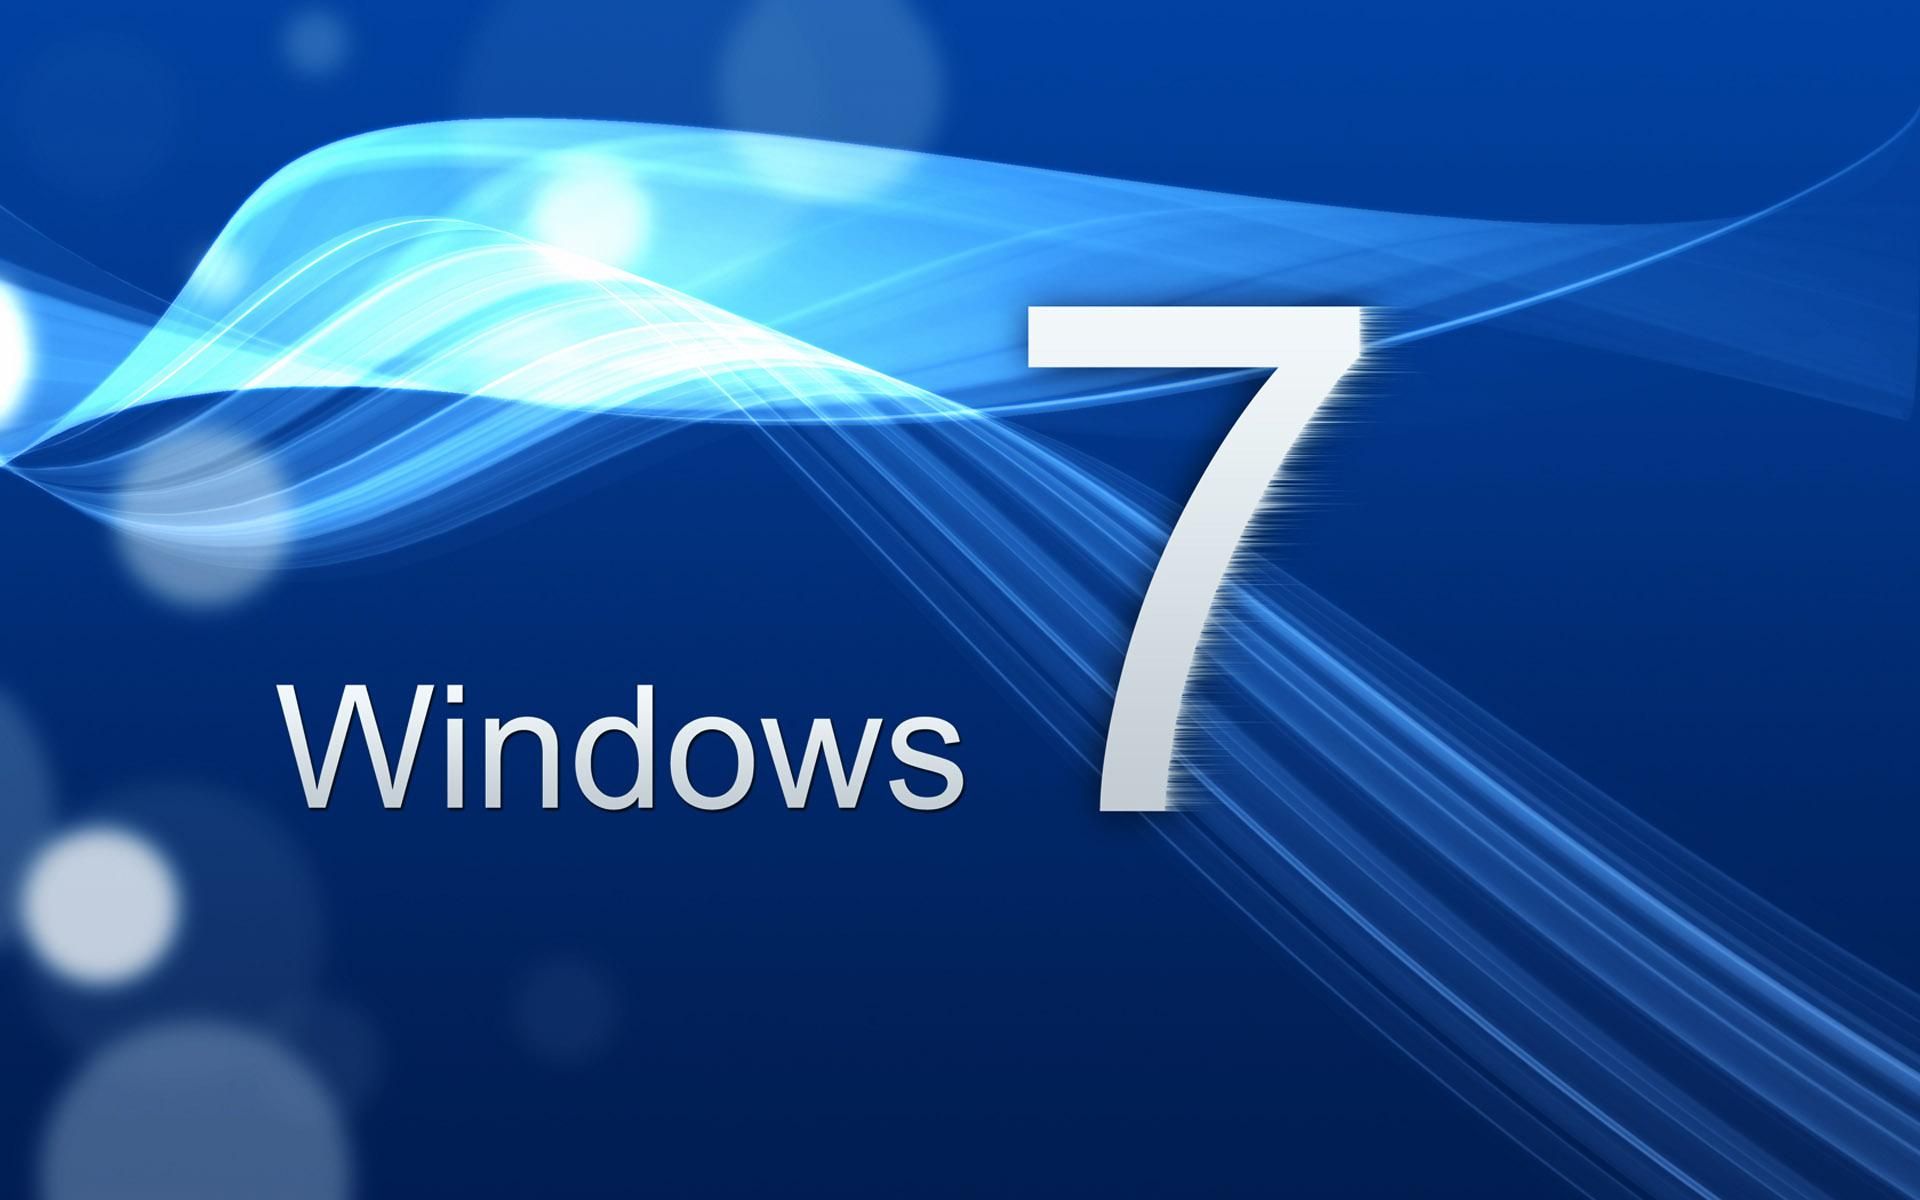 Windows7 Wallpapers Full Hd Wallpaper Search Page 10 | HD ...